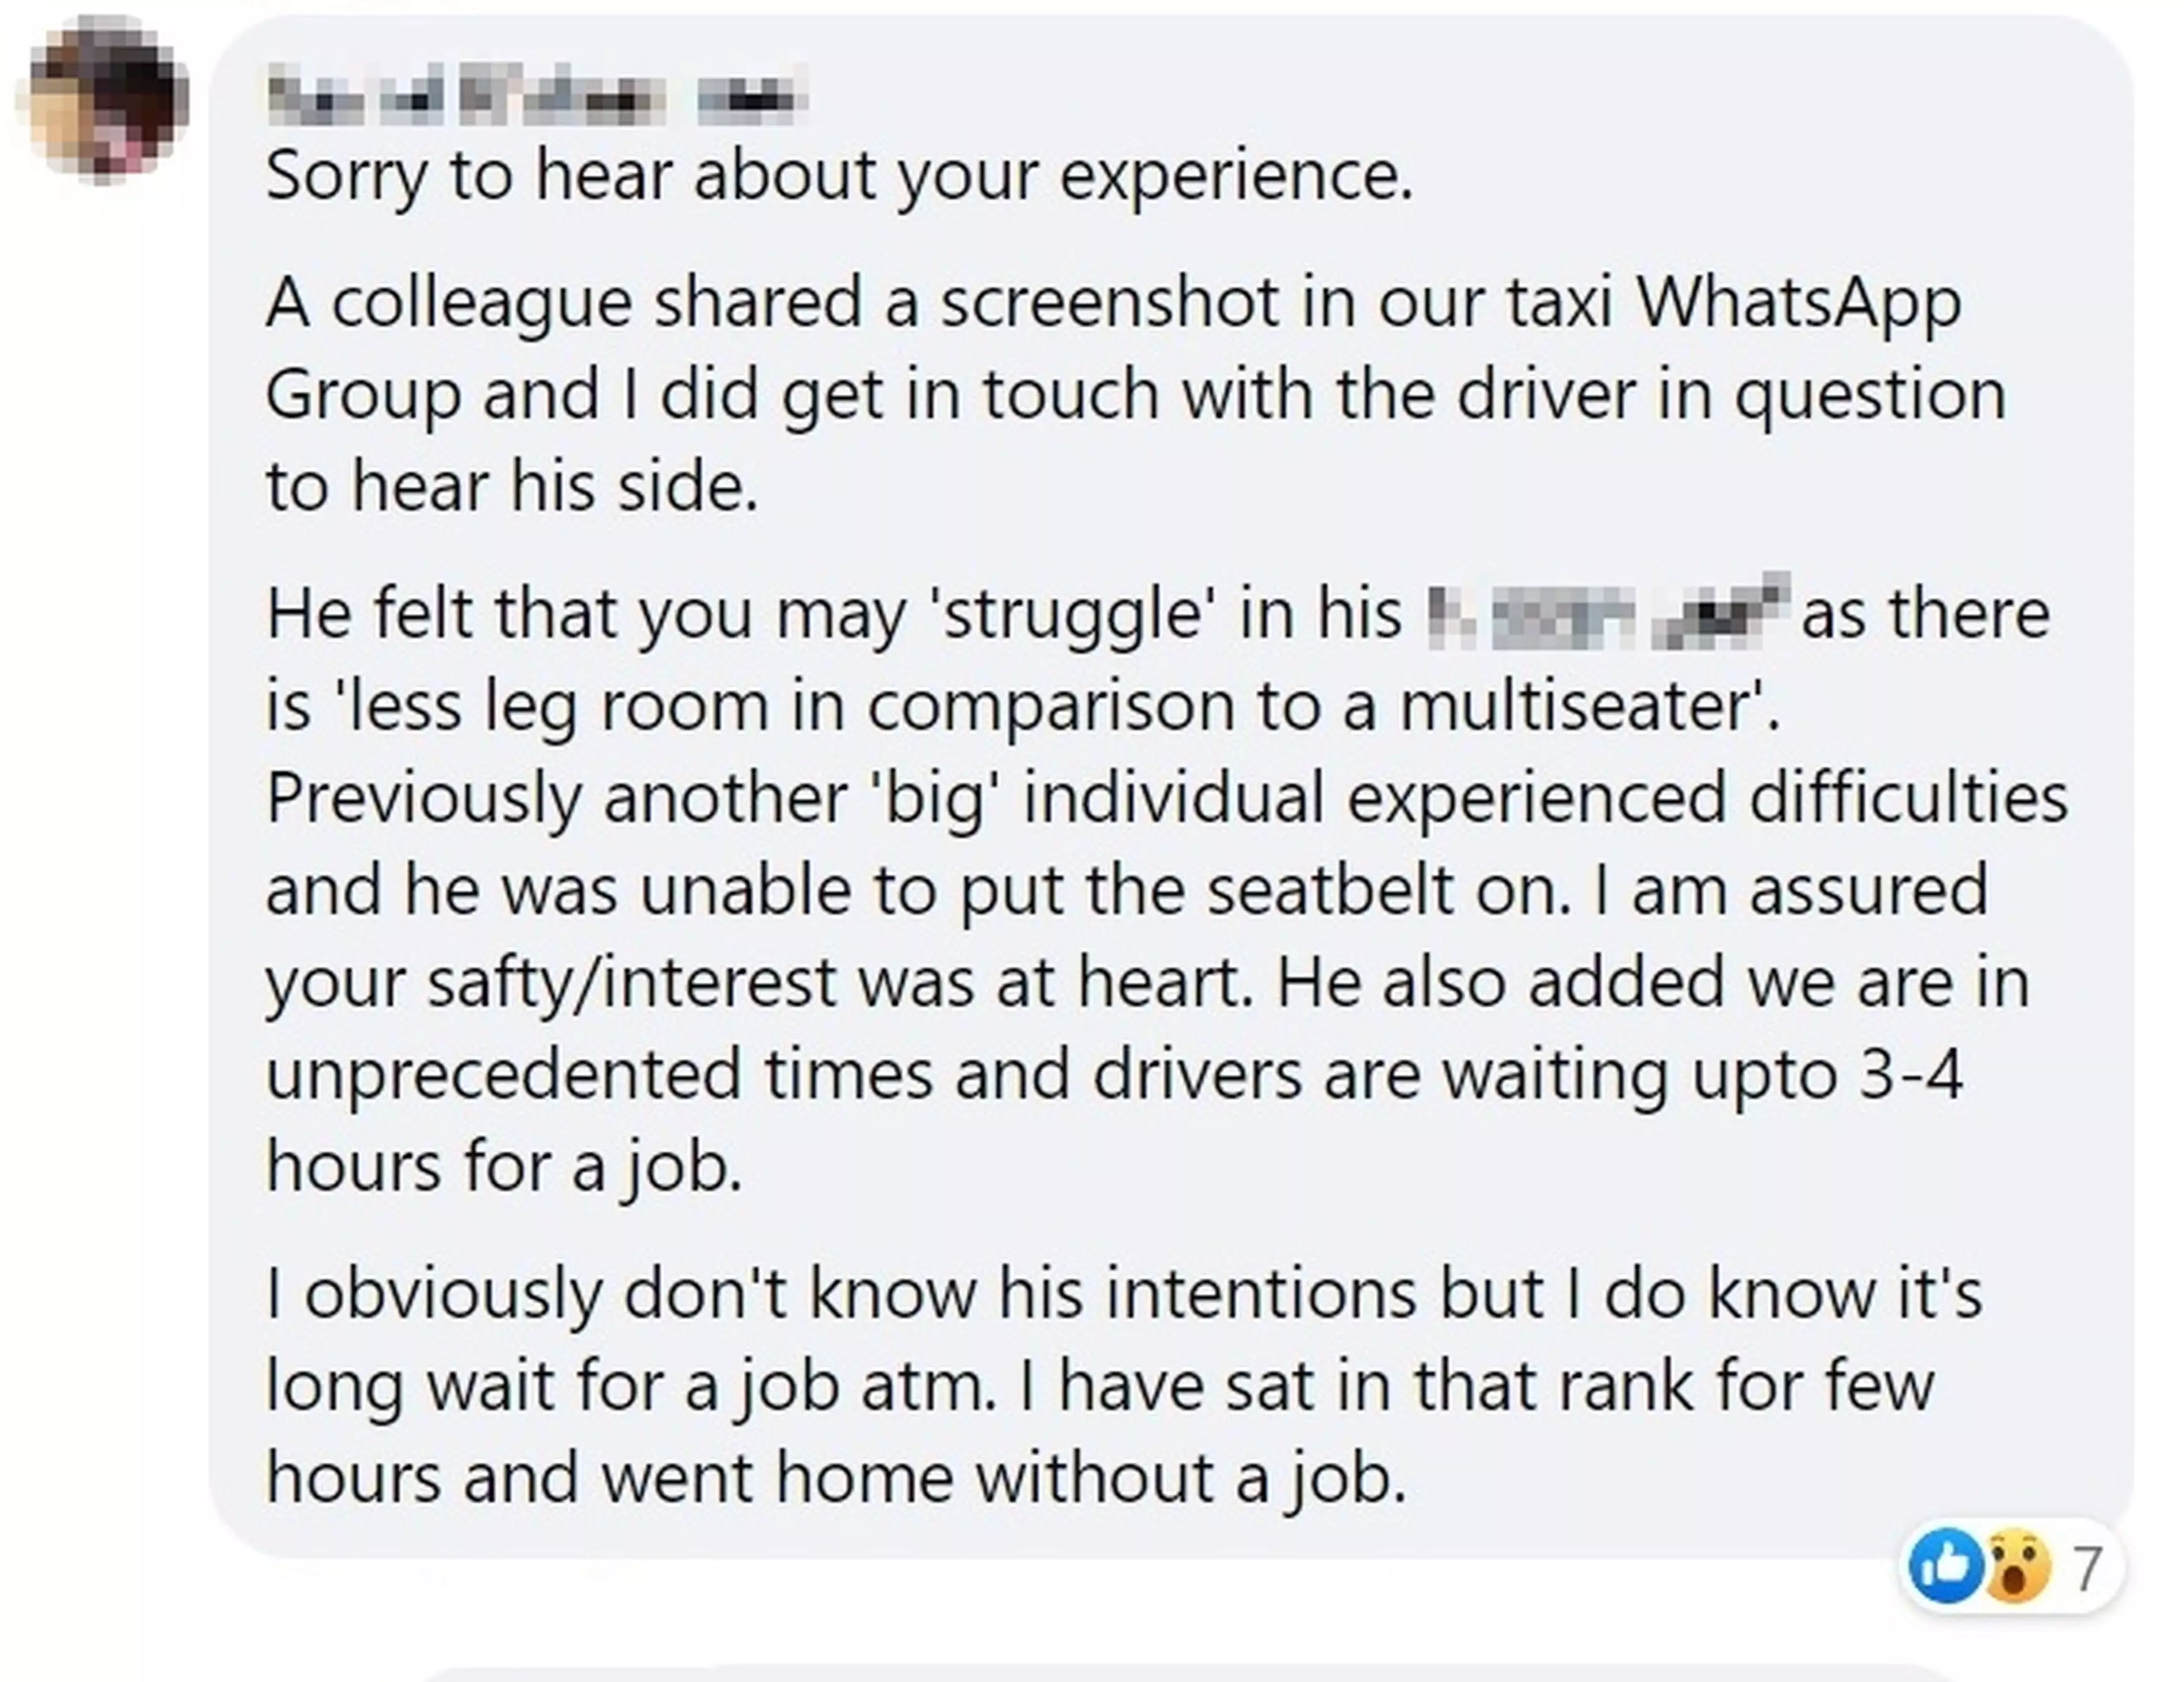 One of the driver's colleagues commented on the post (